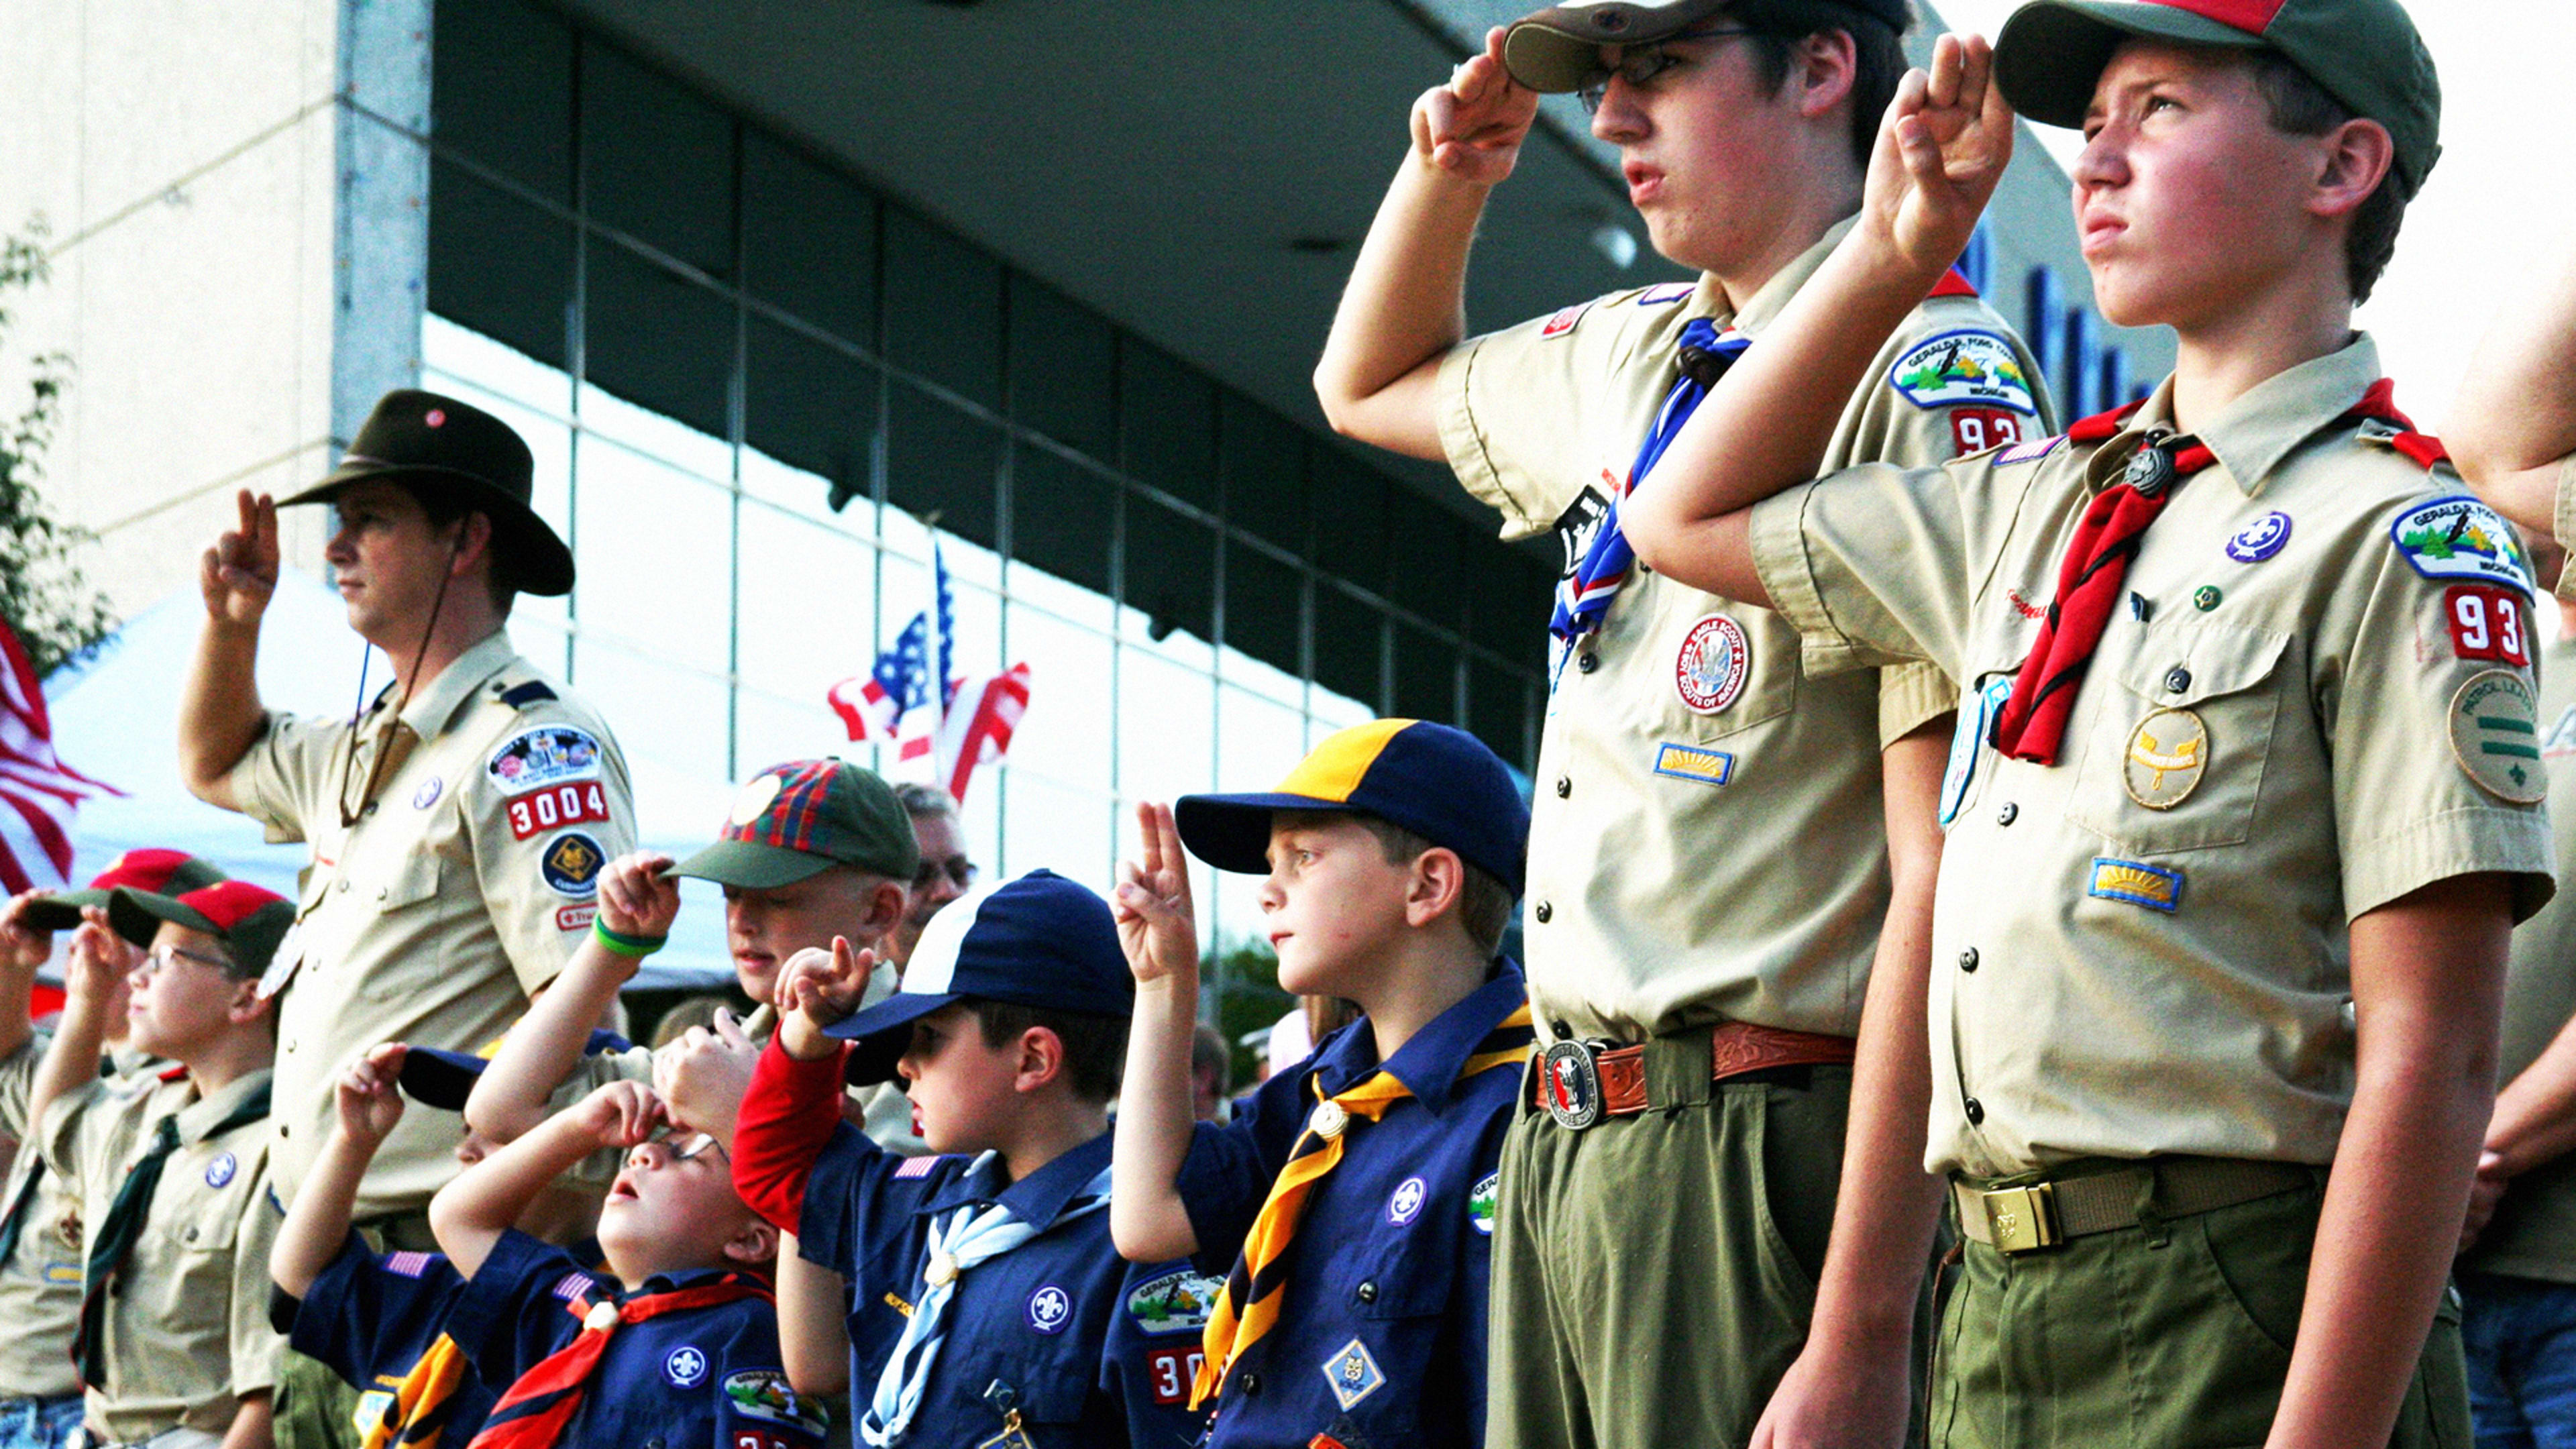 Girls can join the Boy Scouts starting next year